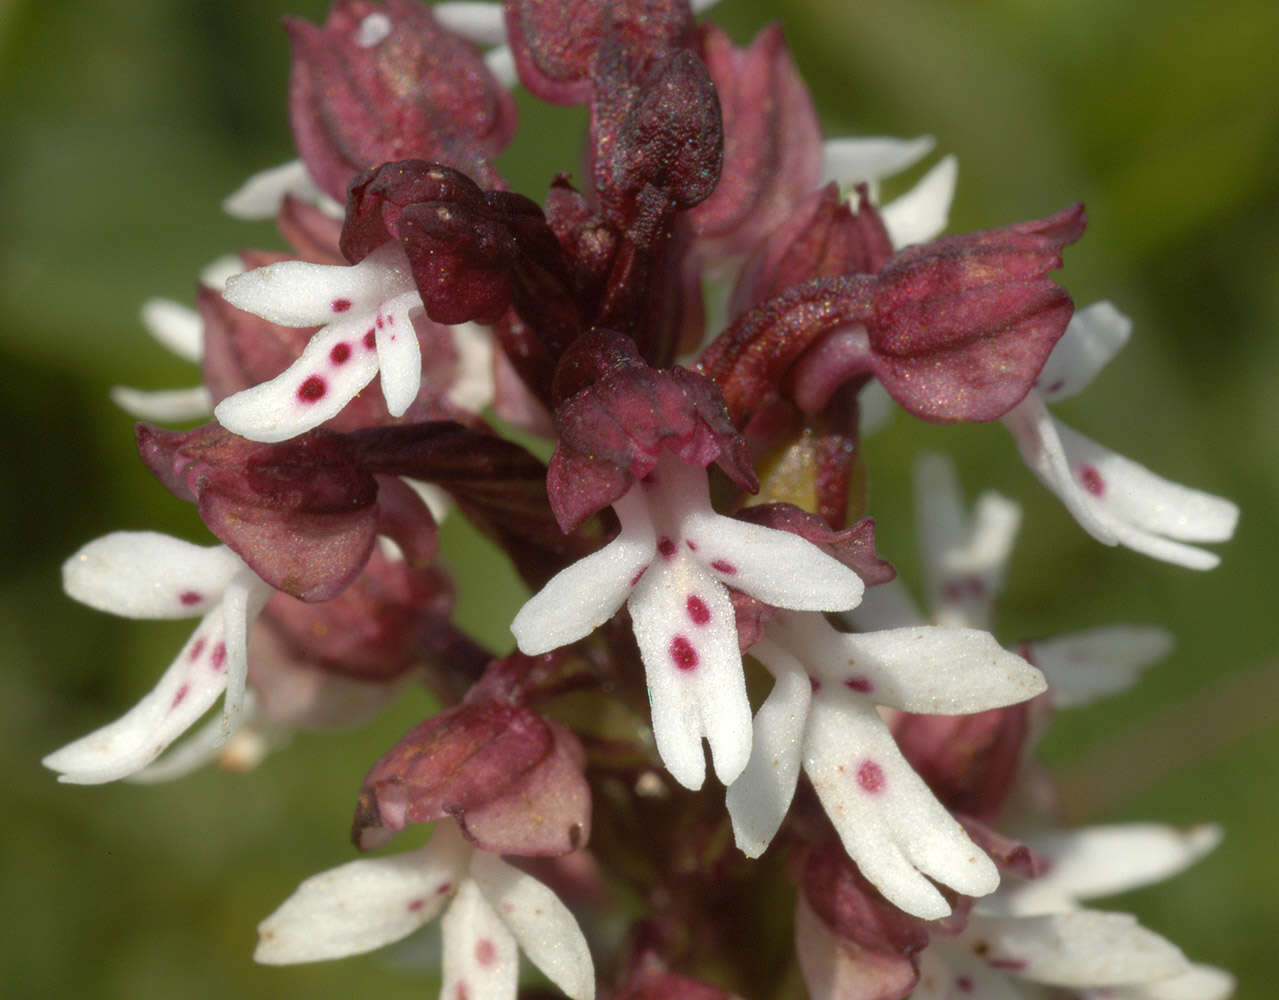 Image of Burnt orchid